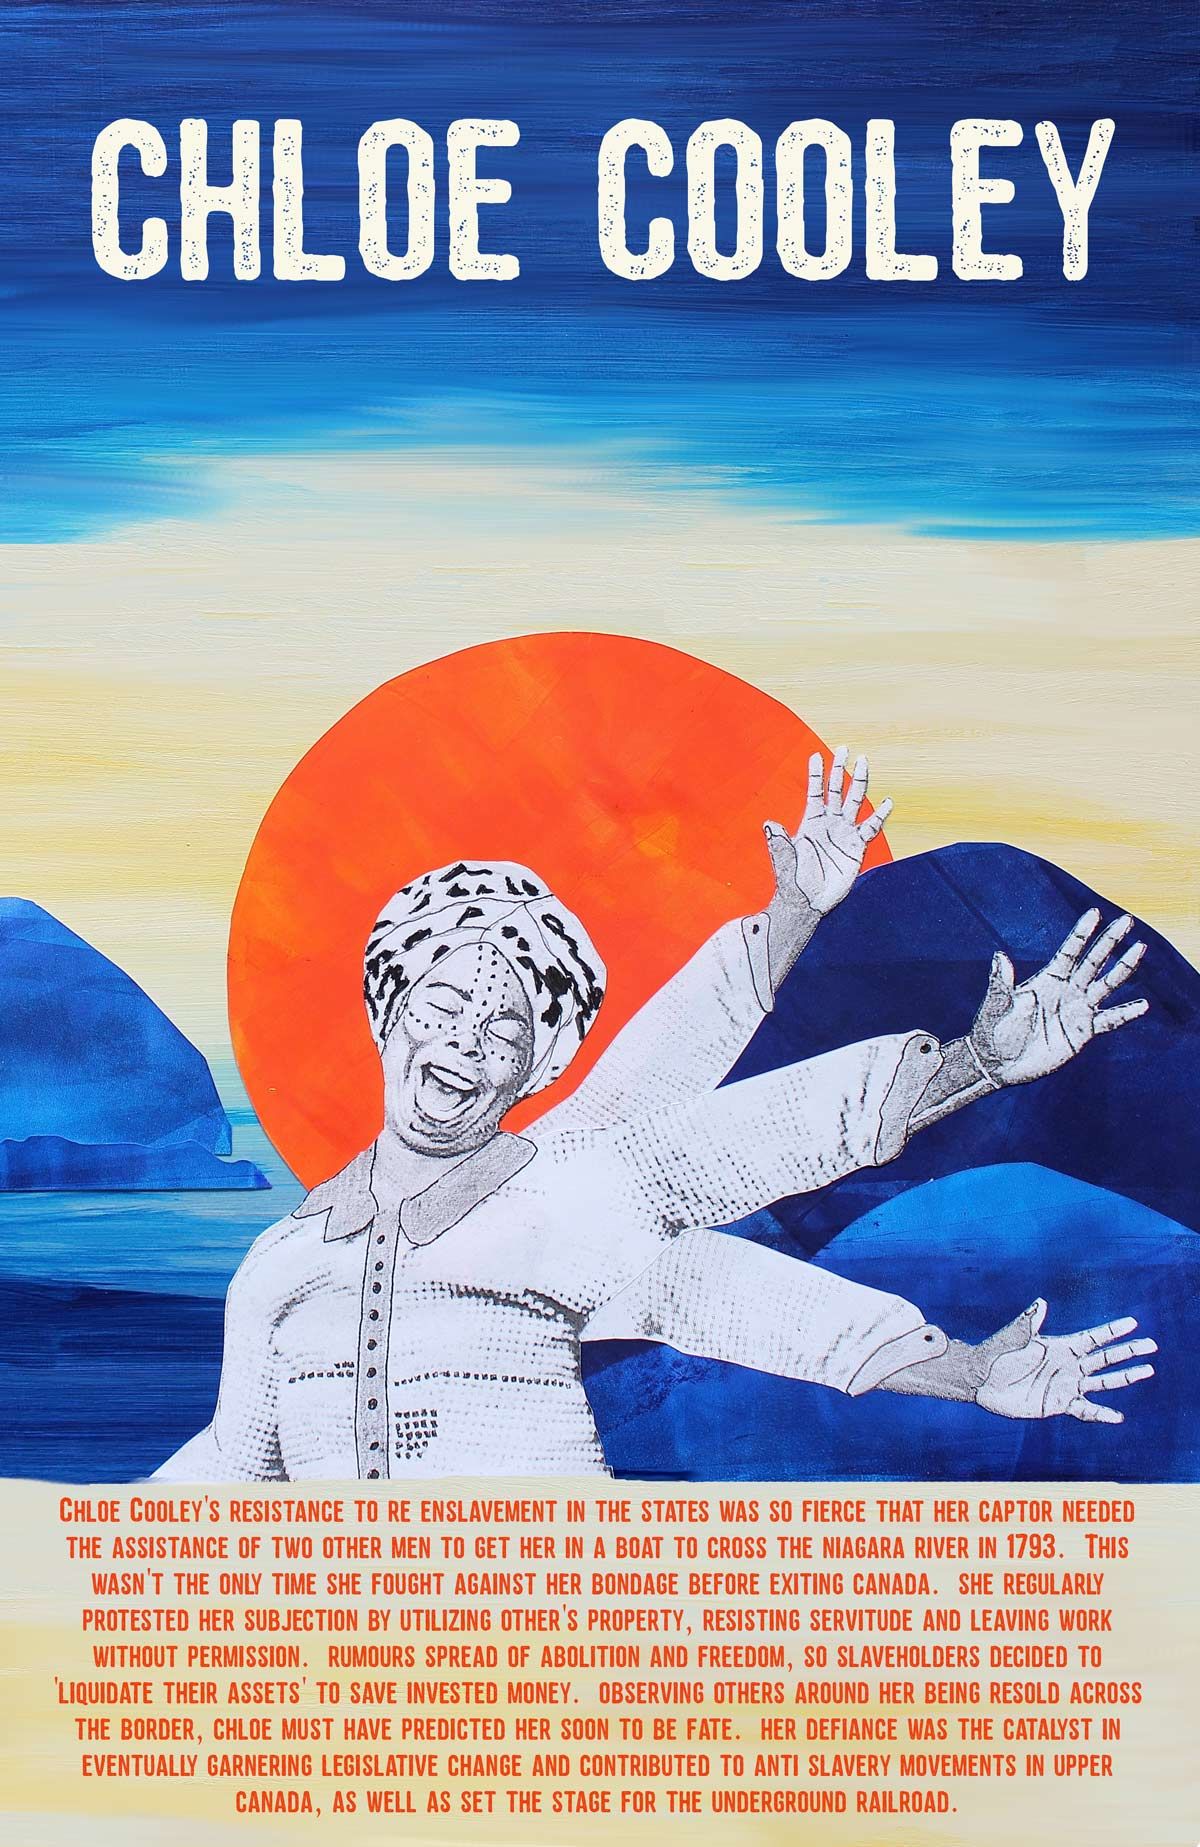 Image of a poster featuring a black women in front of a stylized sunset with a body of text below the image